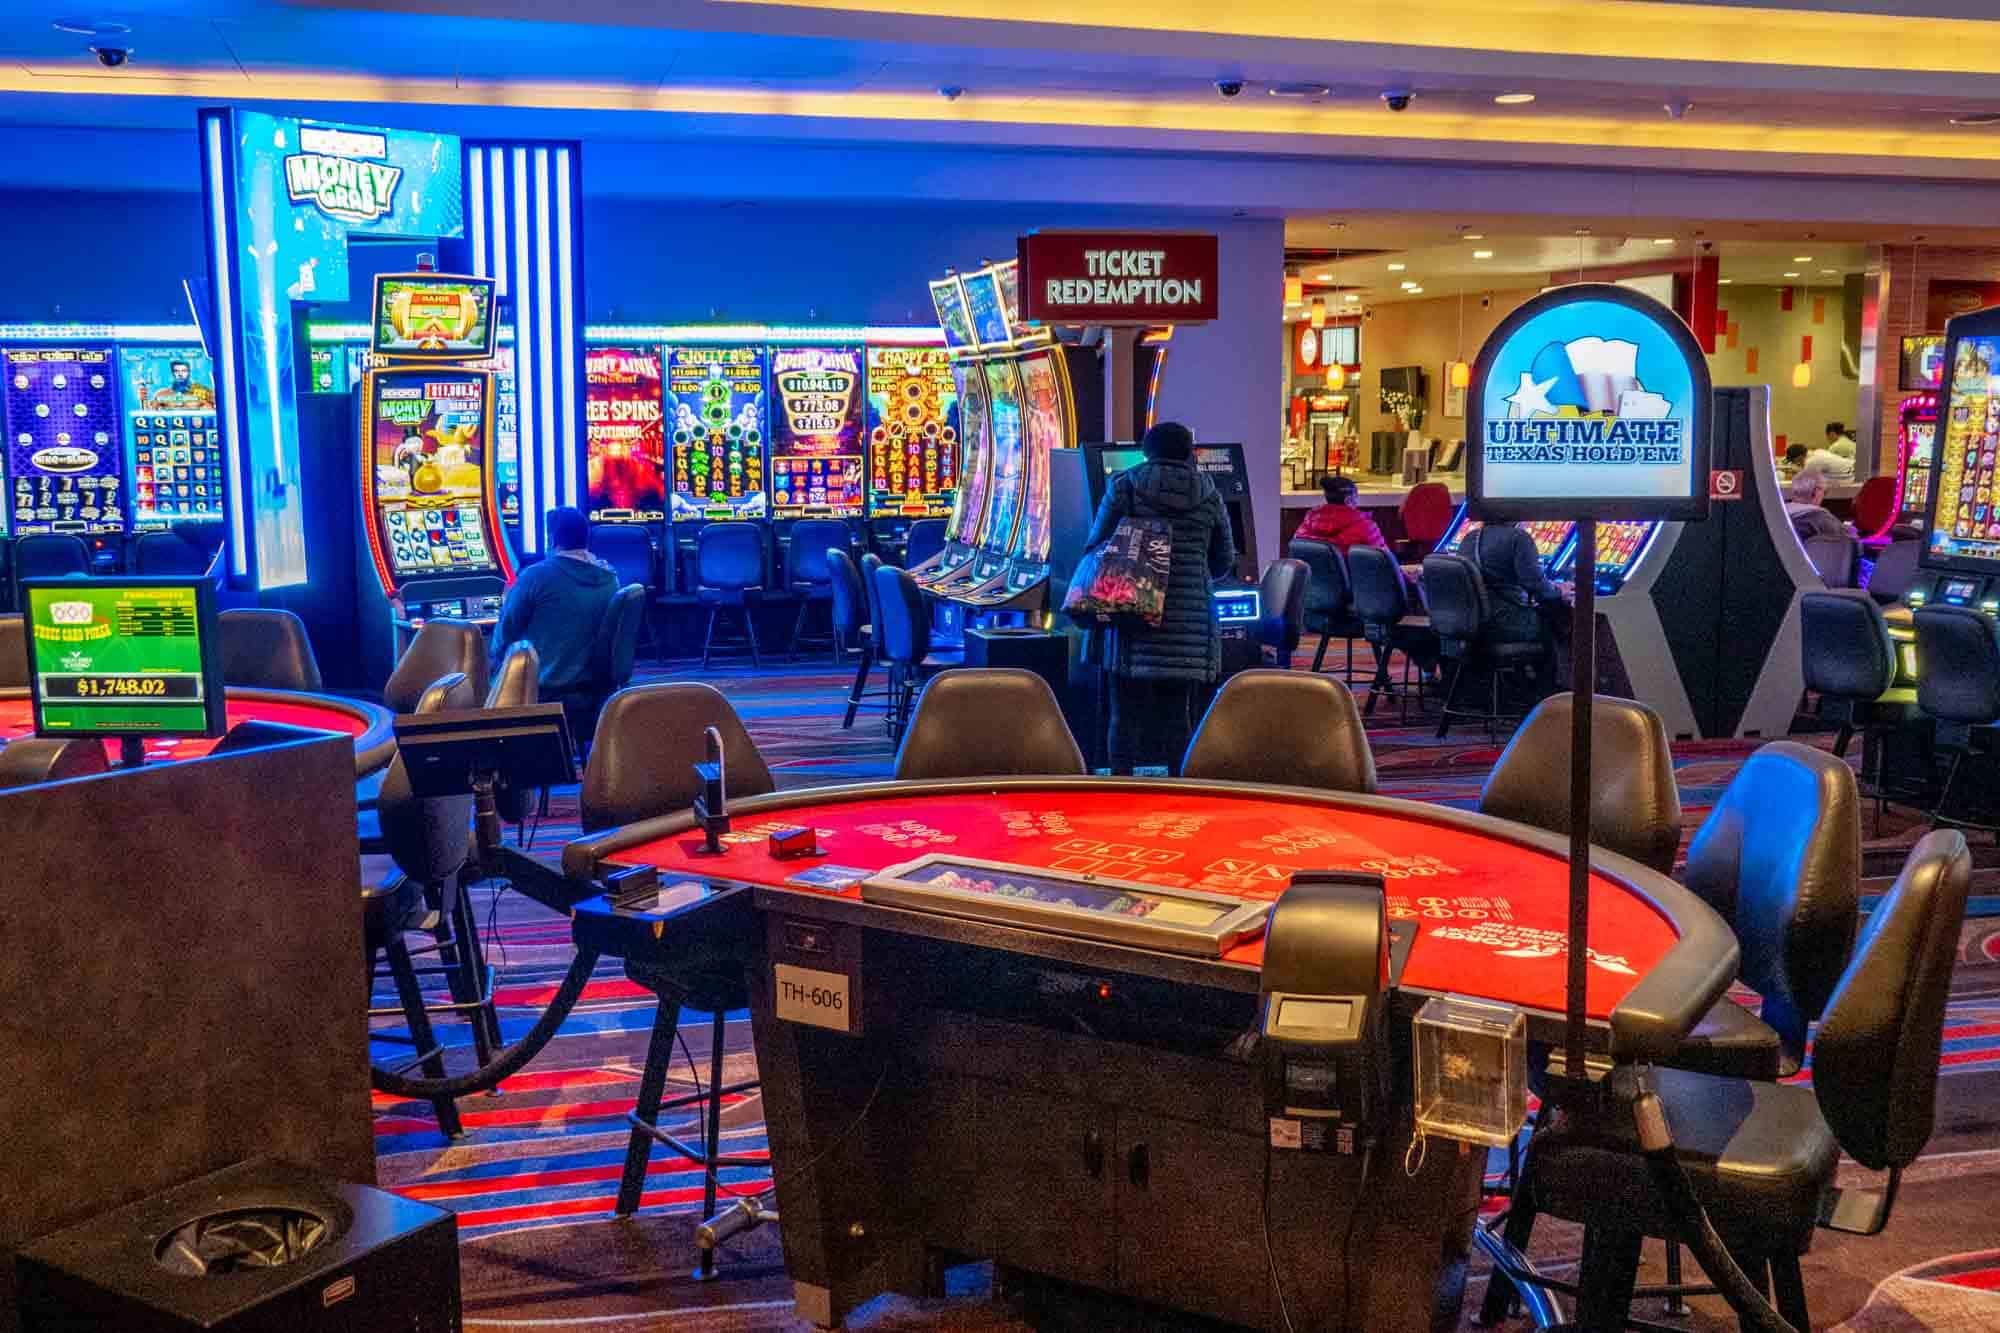 Gaming table and slot machines in a casino.